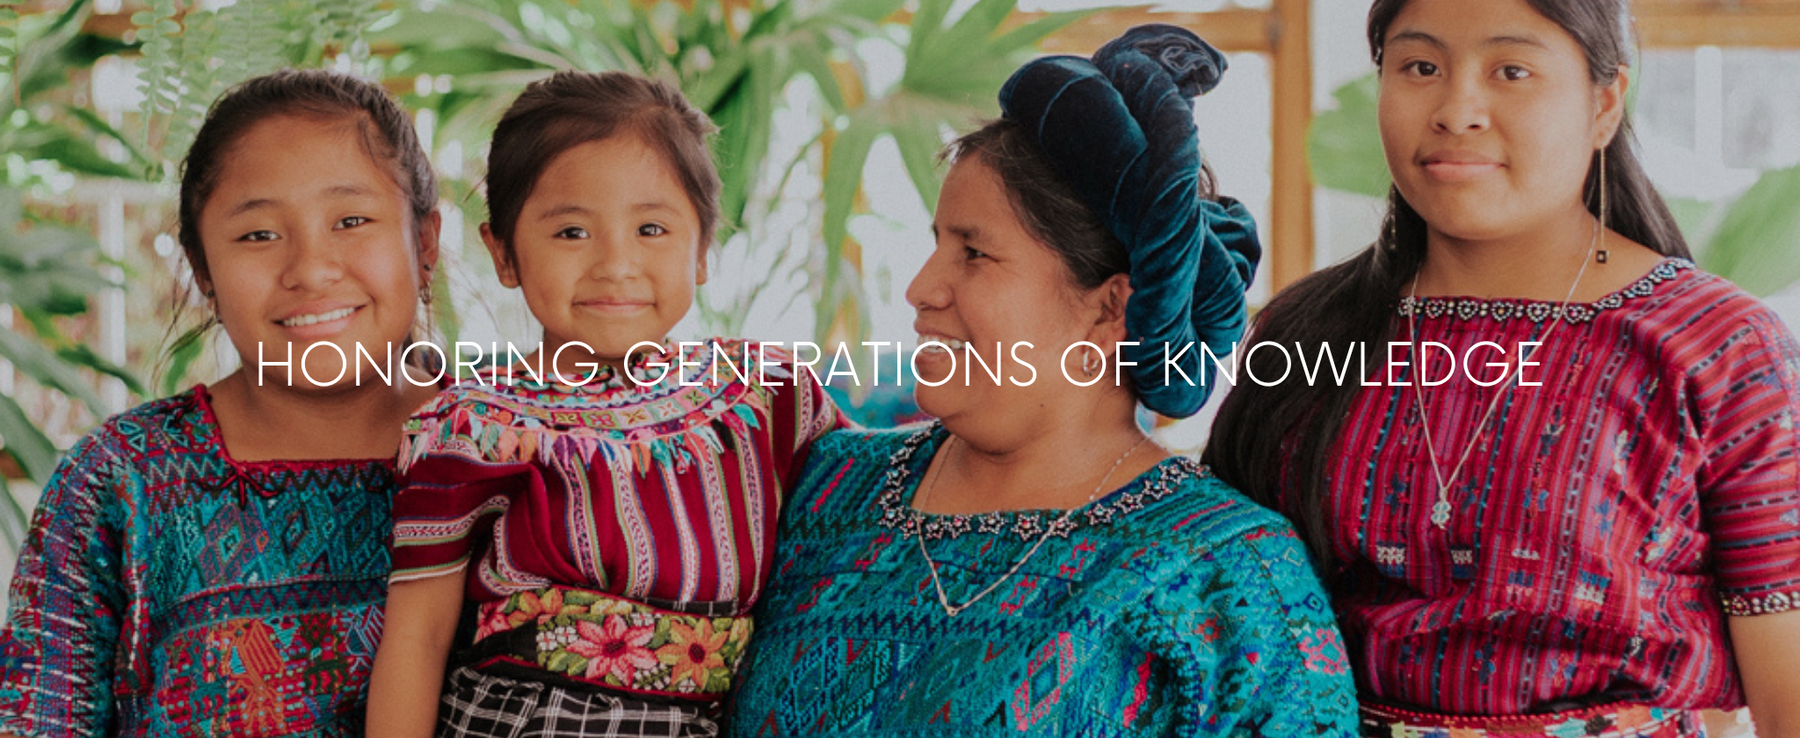 Honoring indigenous cultures and generations of knowledge in rural Guatemala